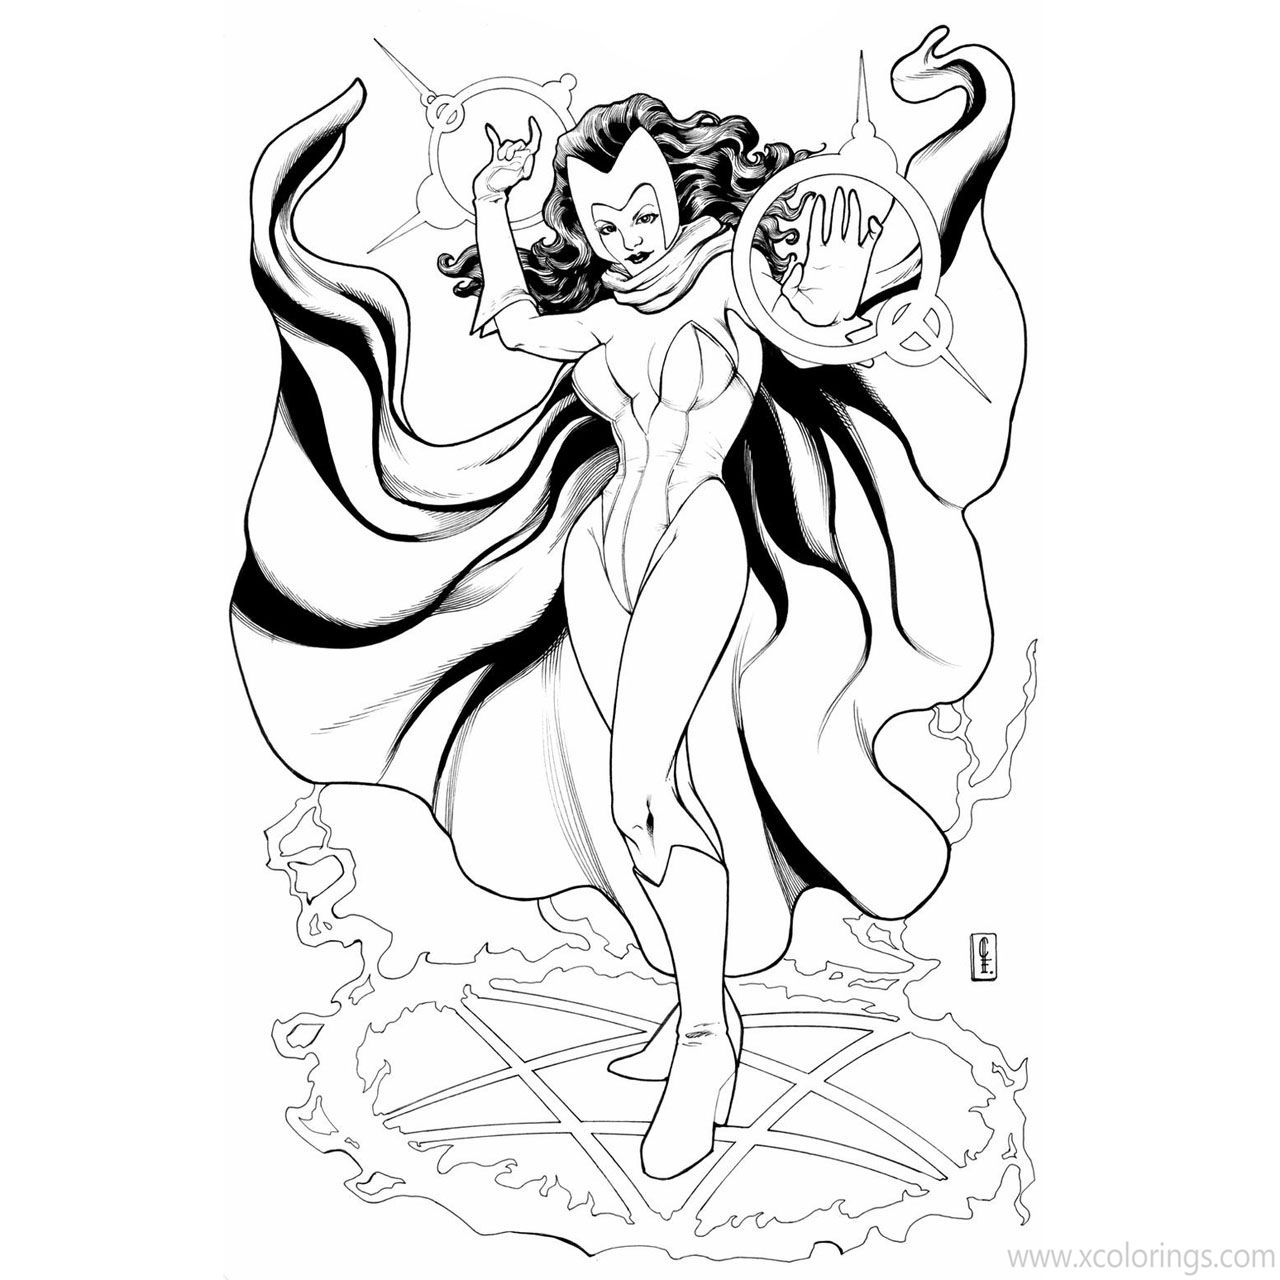 Free WandaVision Coloring Pages Scarlet Witch Line Art by Cheelee printable